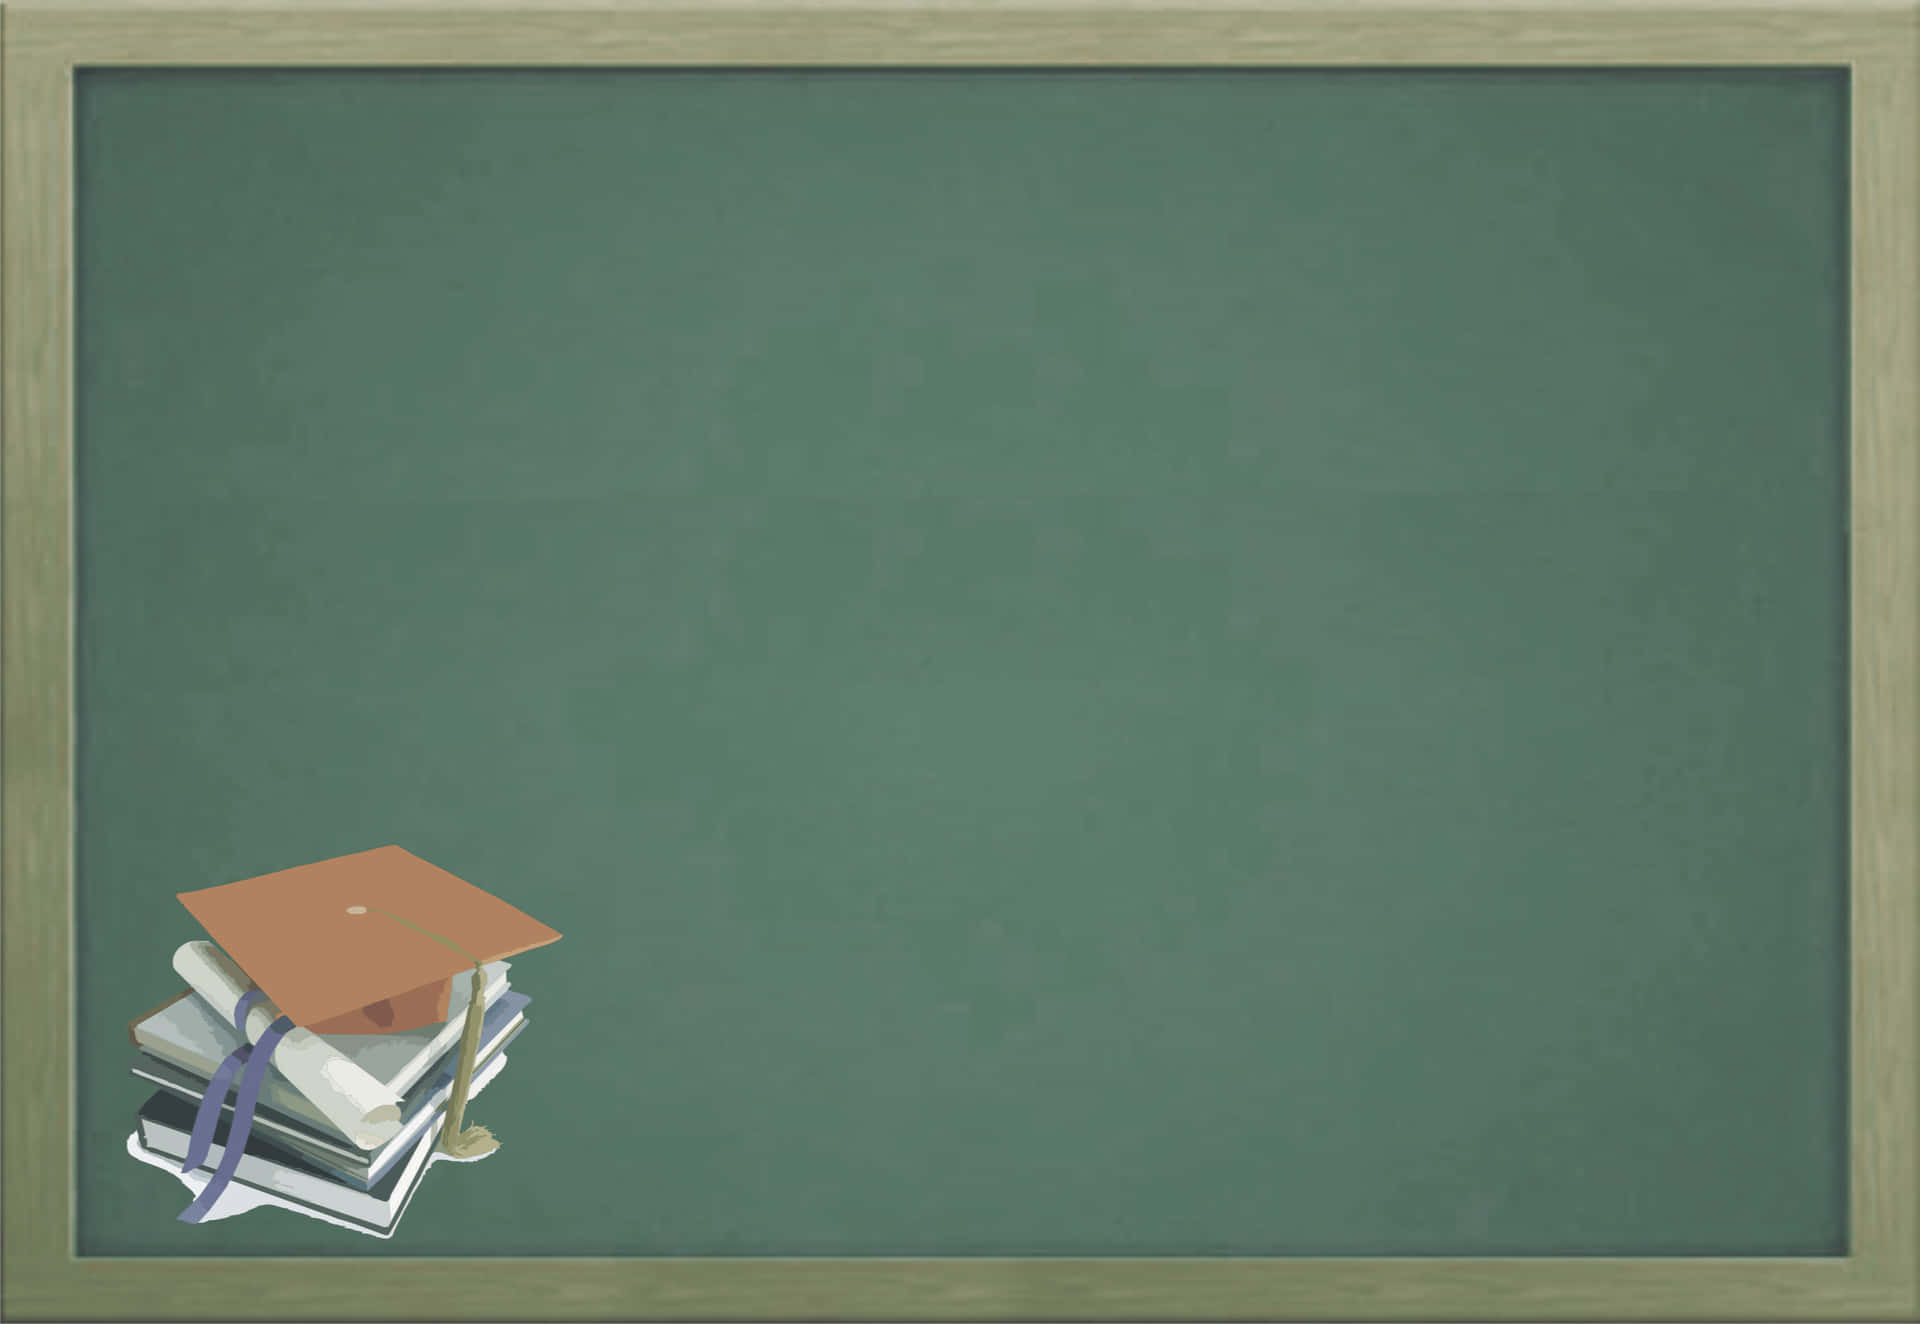 A Blackboard With A Graduation Cap And Books